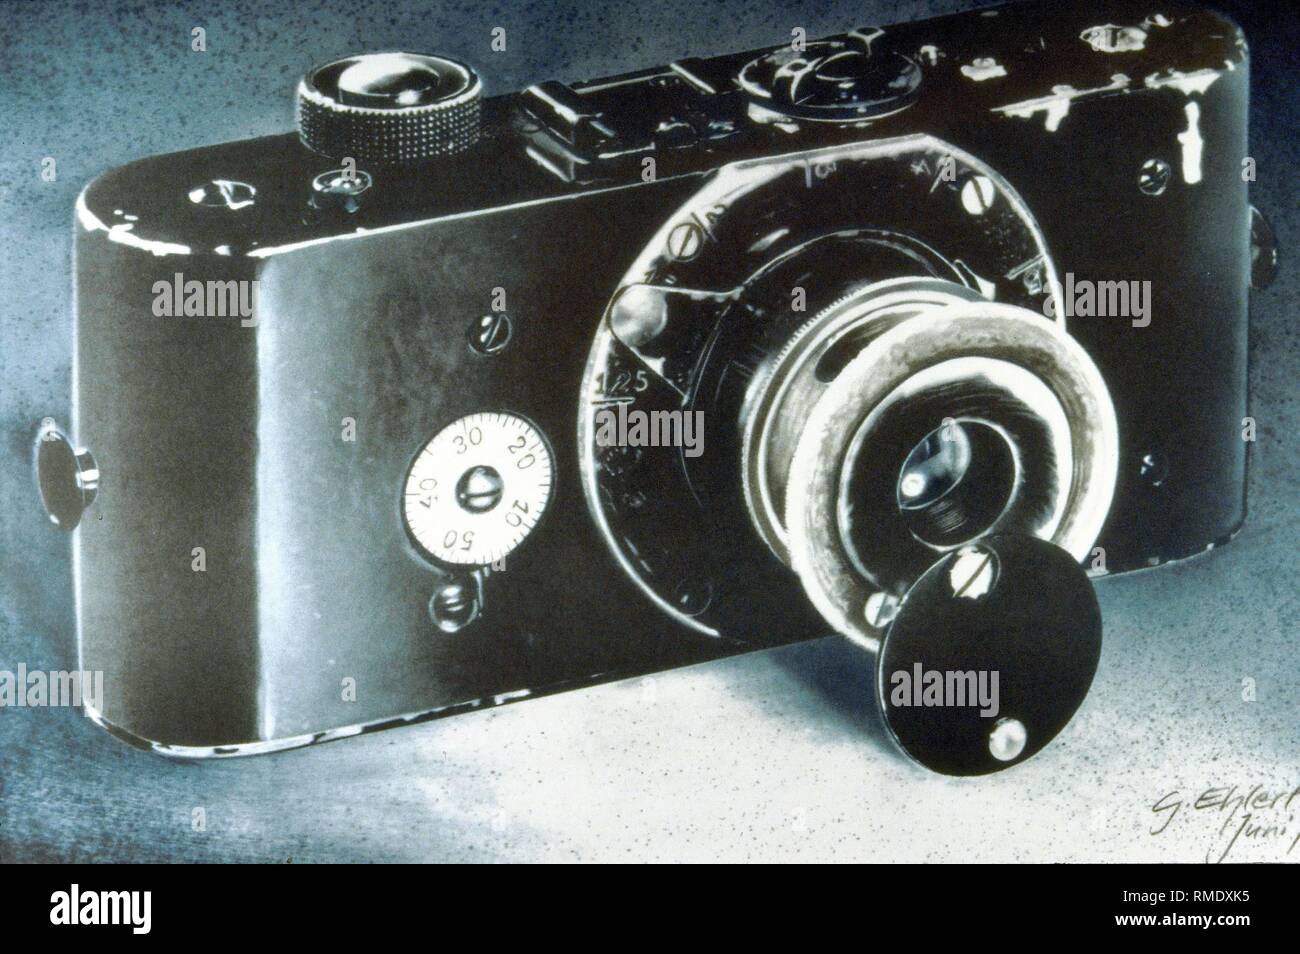 Ur-Leica from 1914, the world's first 35mm camera, developed by Oskar Barnack (1879 - 1936). Stock Photo